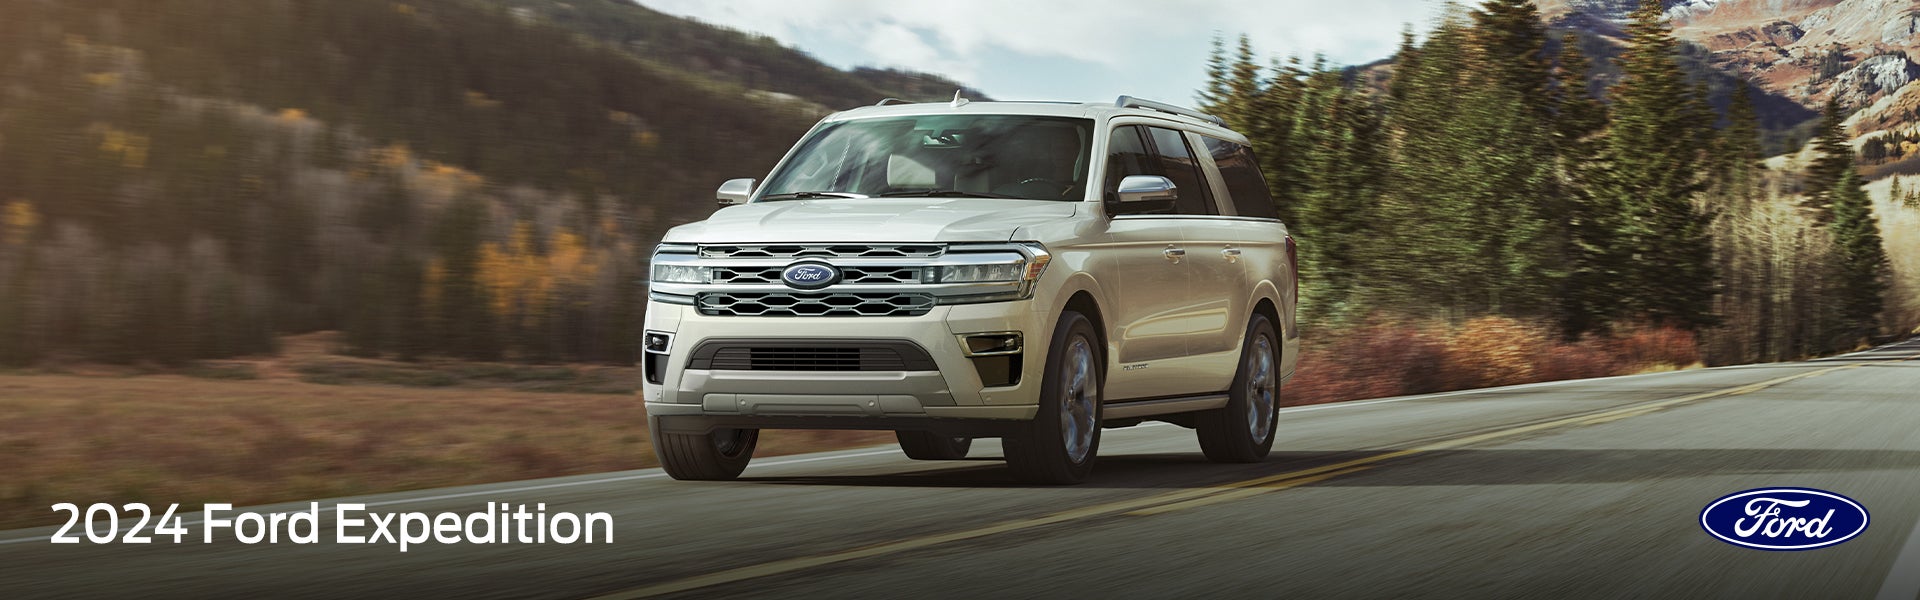 2023 Ford Expedition Available at Coughlin Ford of Pataskala